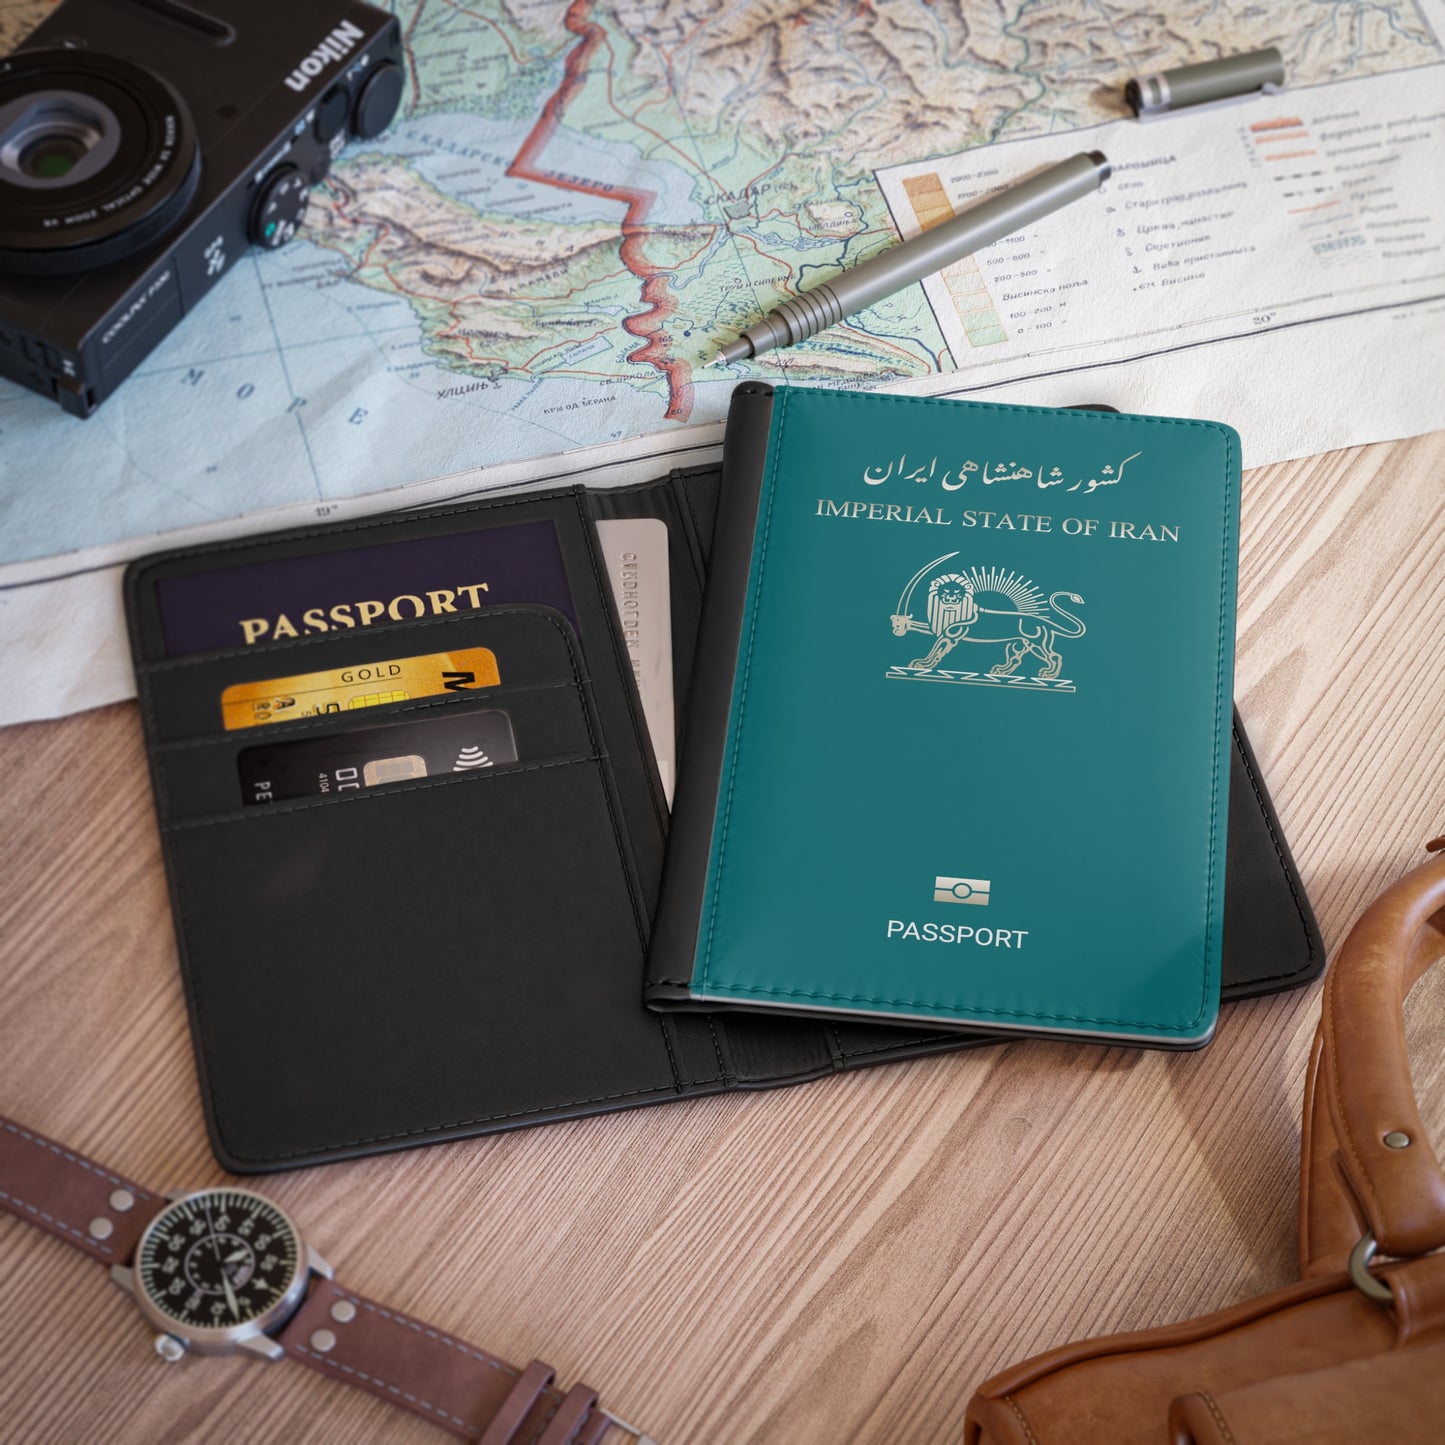 Imperial State Of Iran Passport Cover